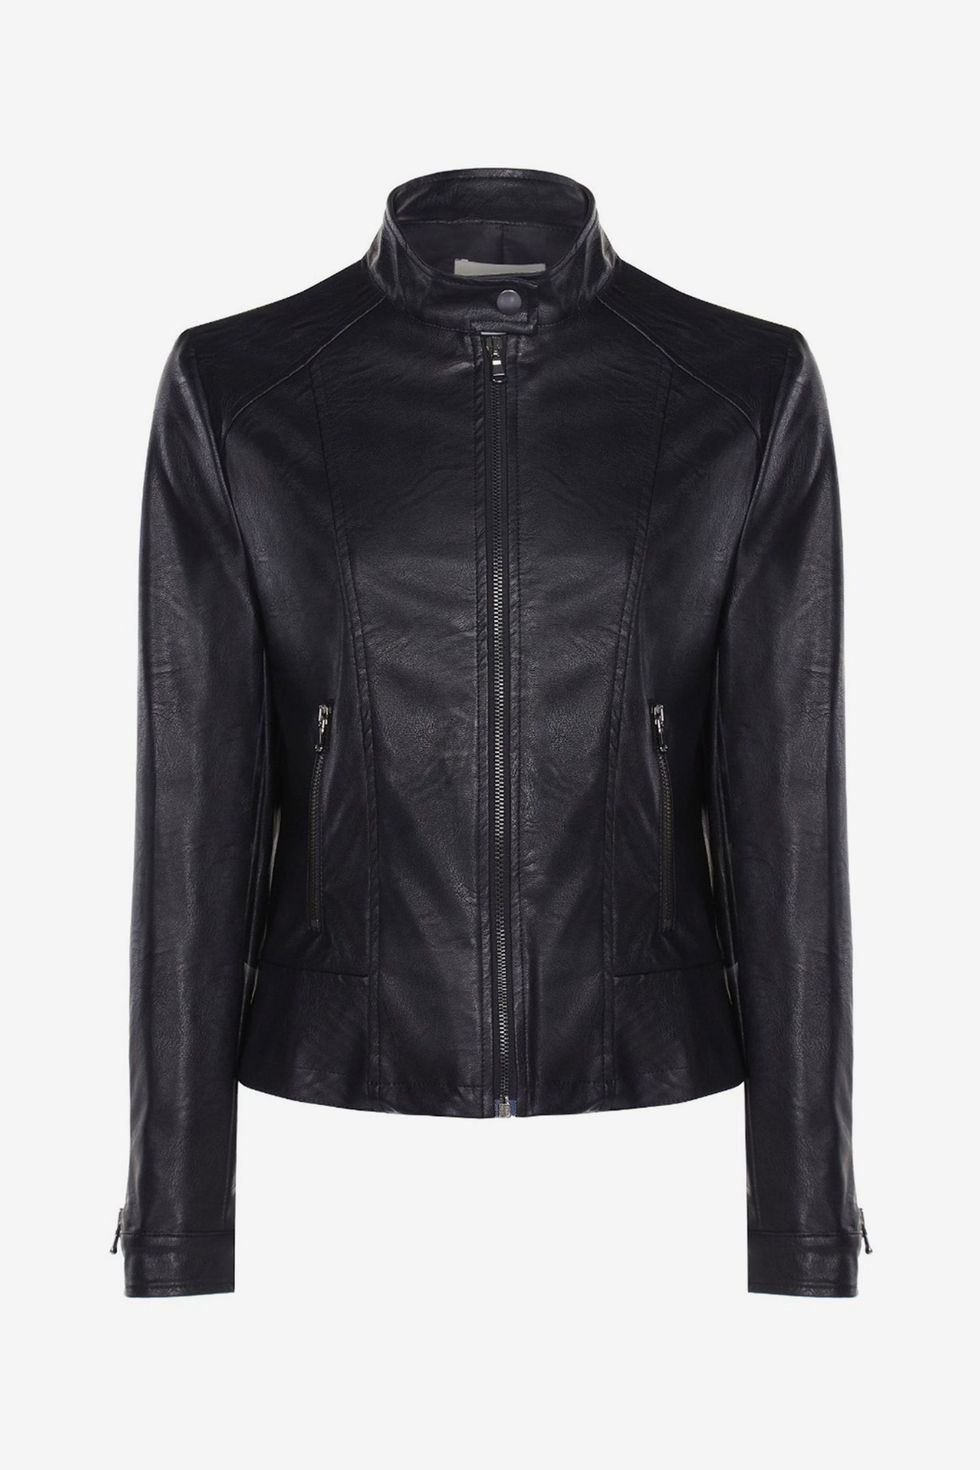 Leather Zip up Motorcycle Crop Jacket Moto Biker Coat Ladies Leather Jacket  PU Outerwear Motocrycle Clothing Women Clothes - China Leather Coat and  Clothes price